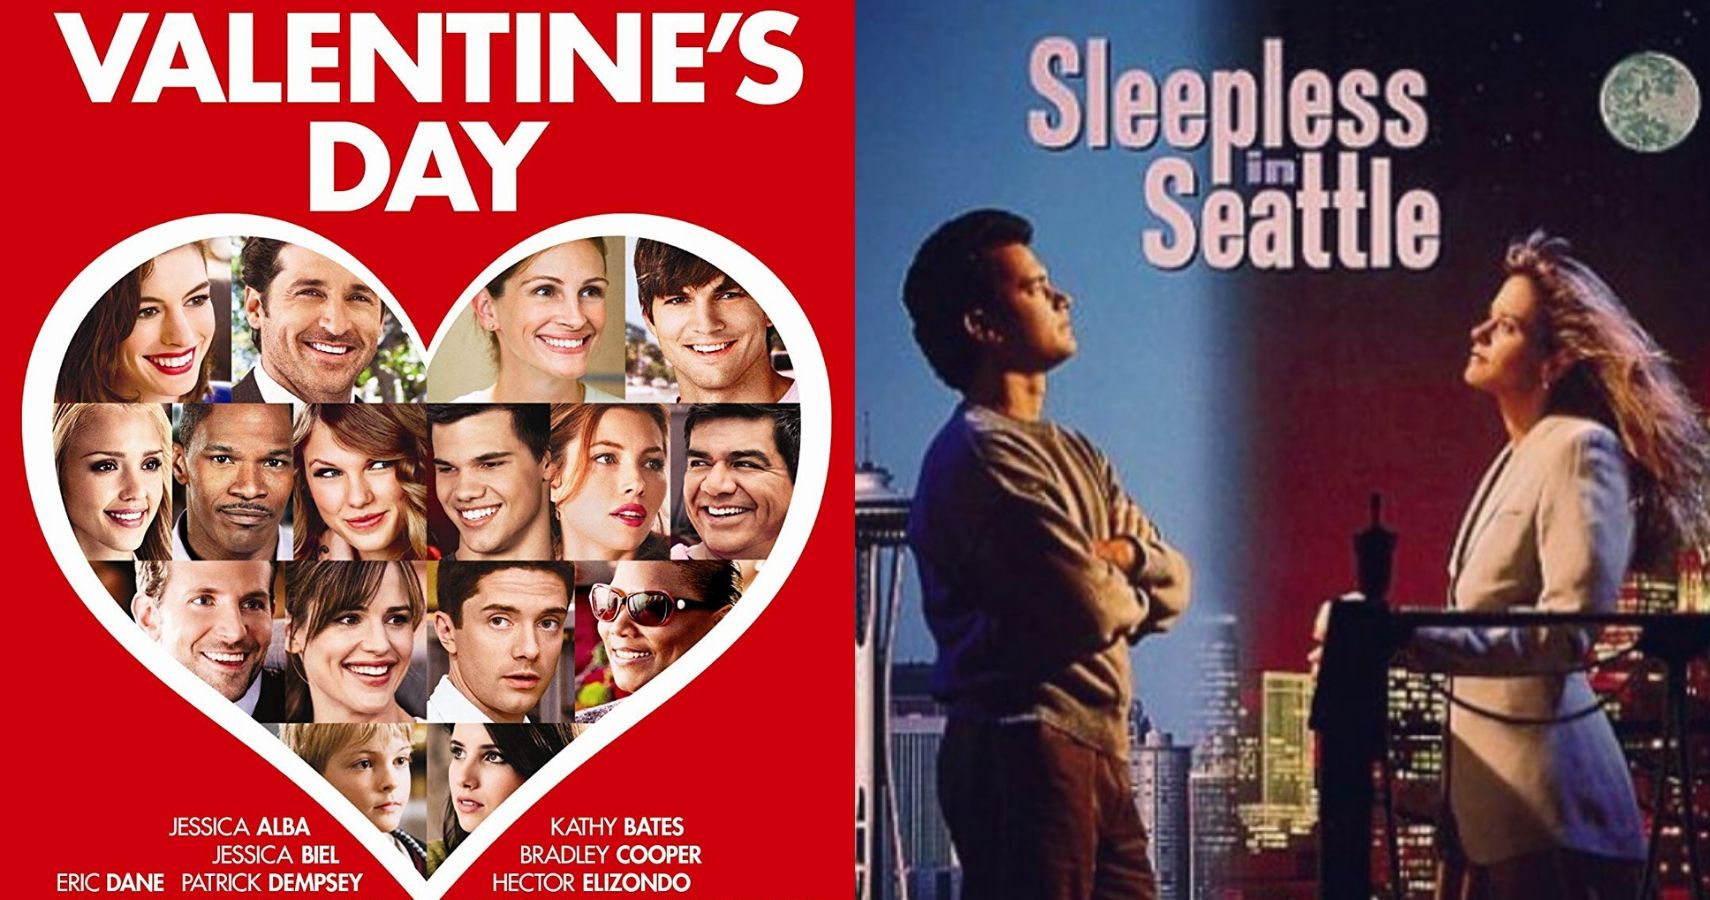 The 10 Best Valentines Day Movies Of All Time (According To Rotten